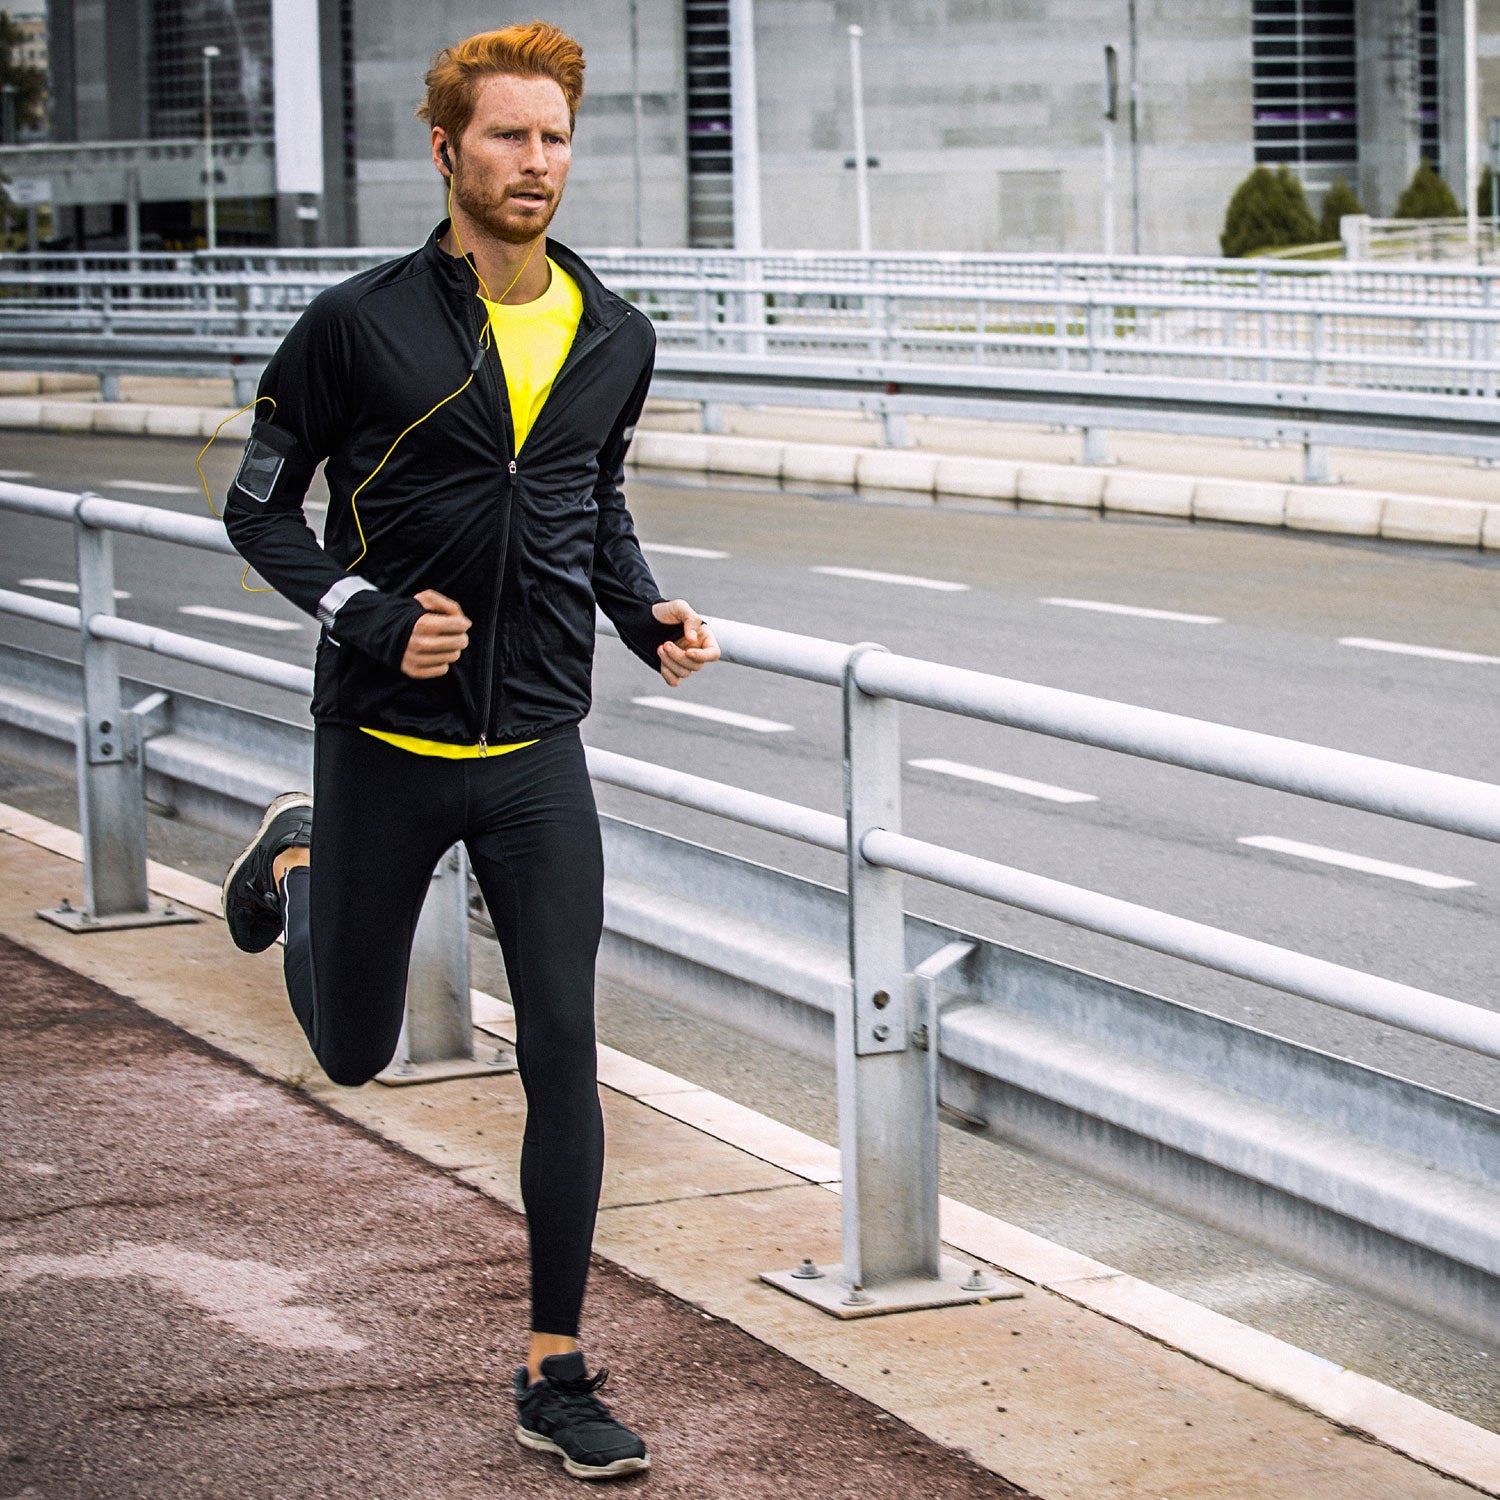 The Best Kinds of Pants to Wear for Running